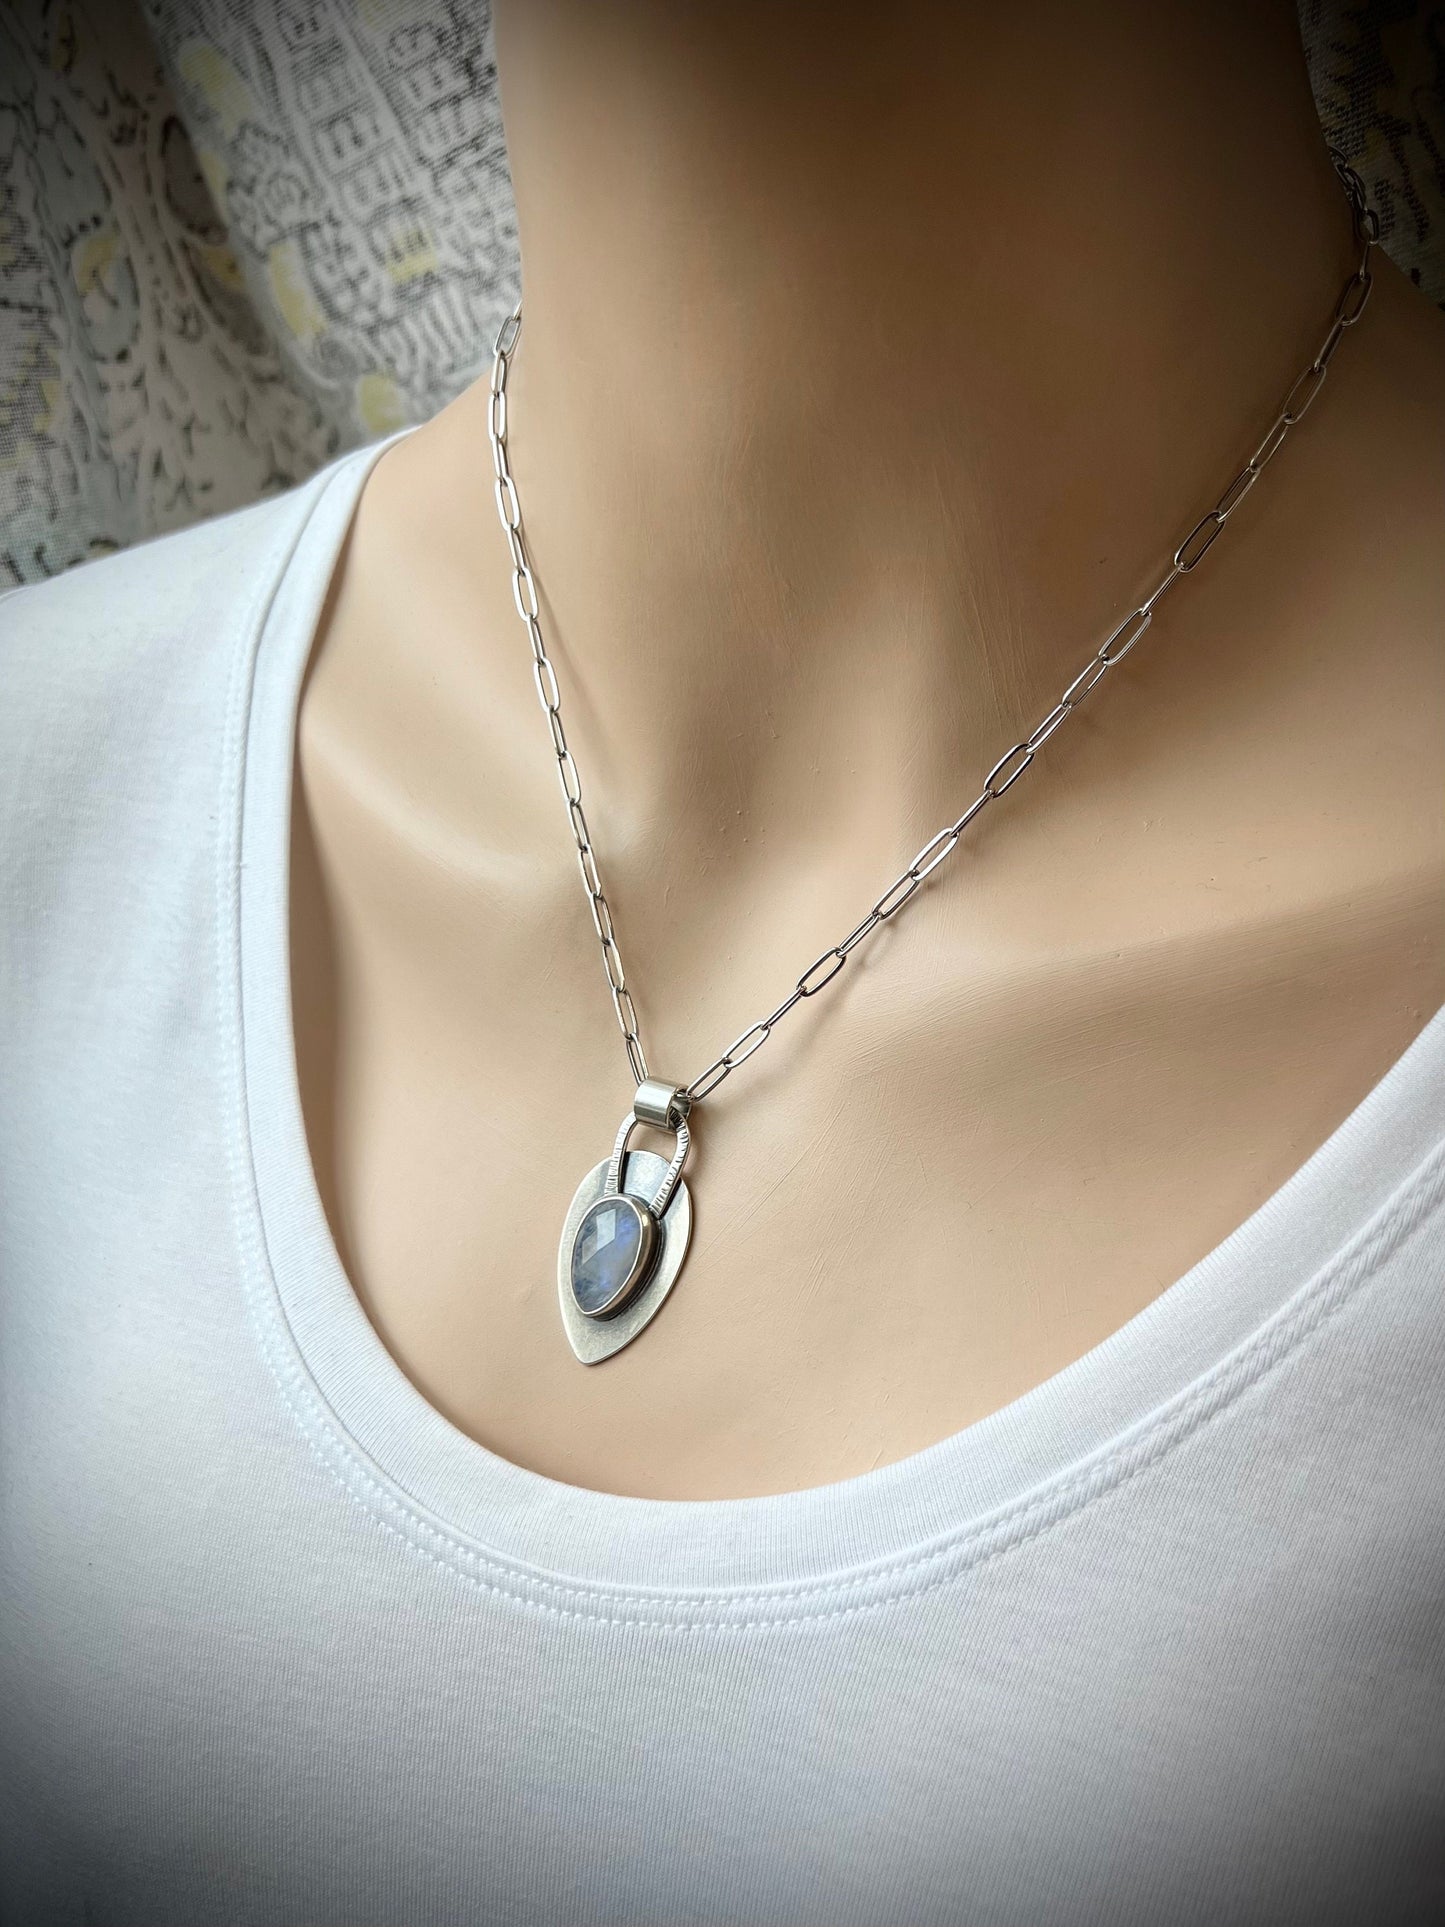 Rainbow Moonstone Sterling Silver Necklace - Handmade One-of-a-kind Pendant on Sterling Silver Chain